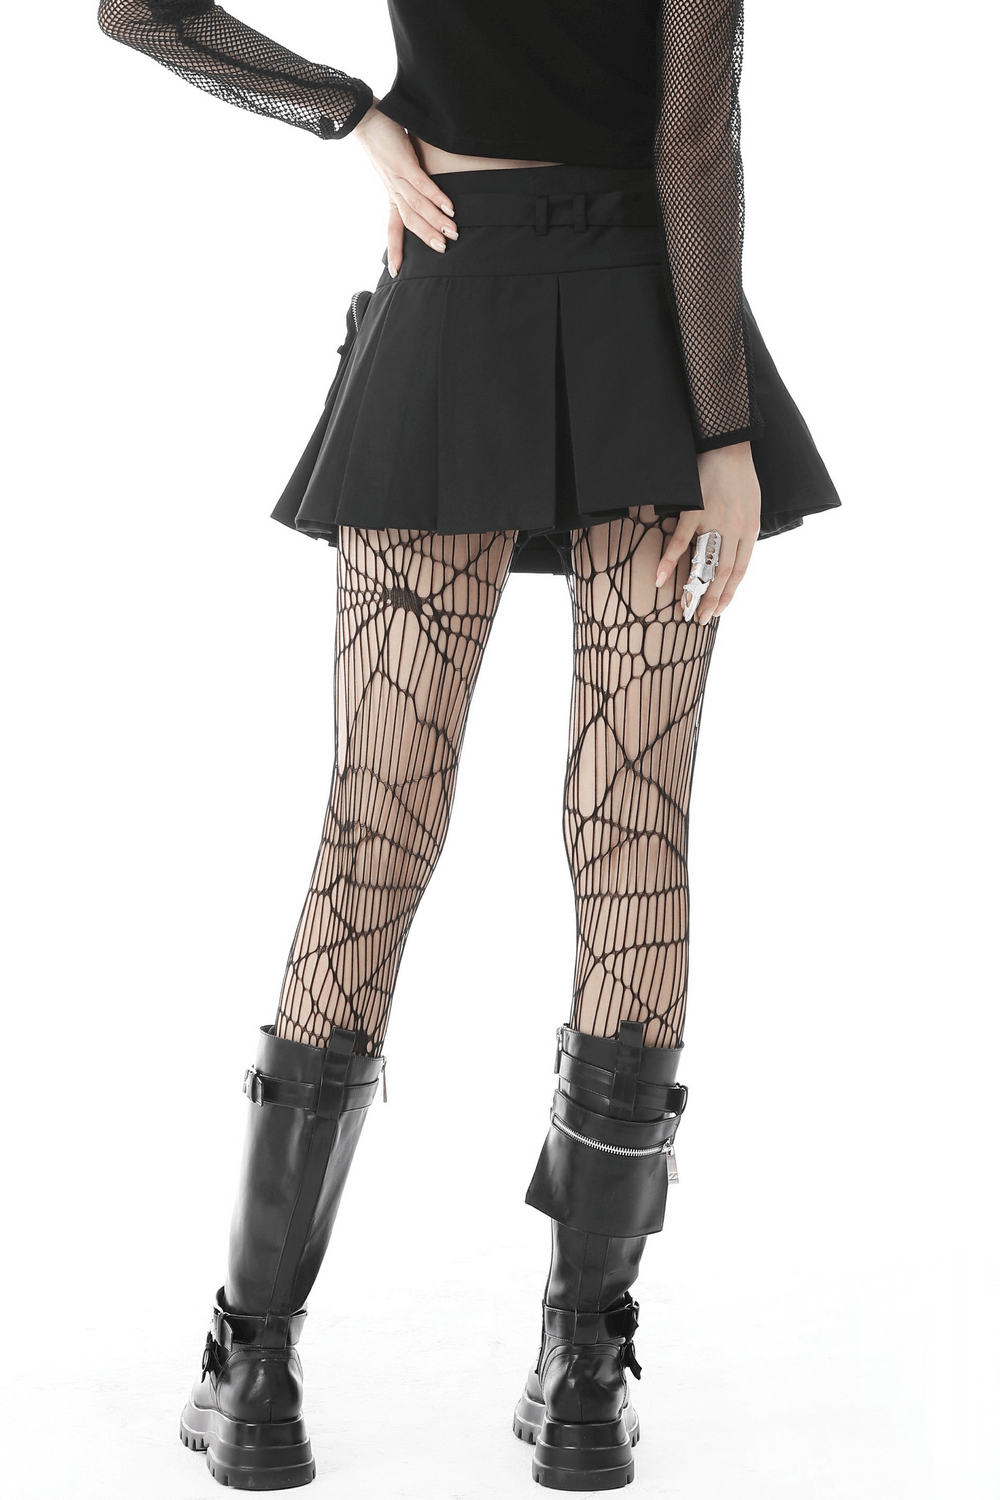 Gothic Female Mini Skirt with Chain Belt and Pocket